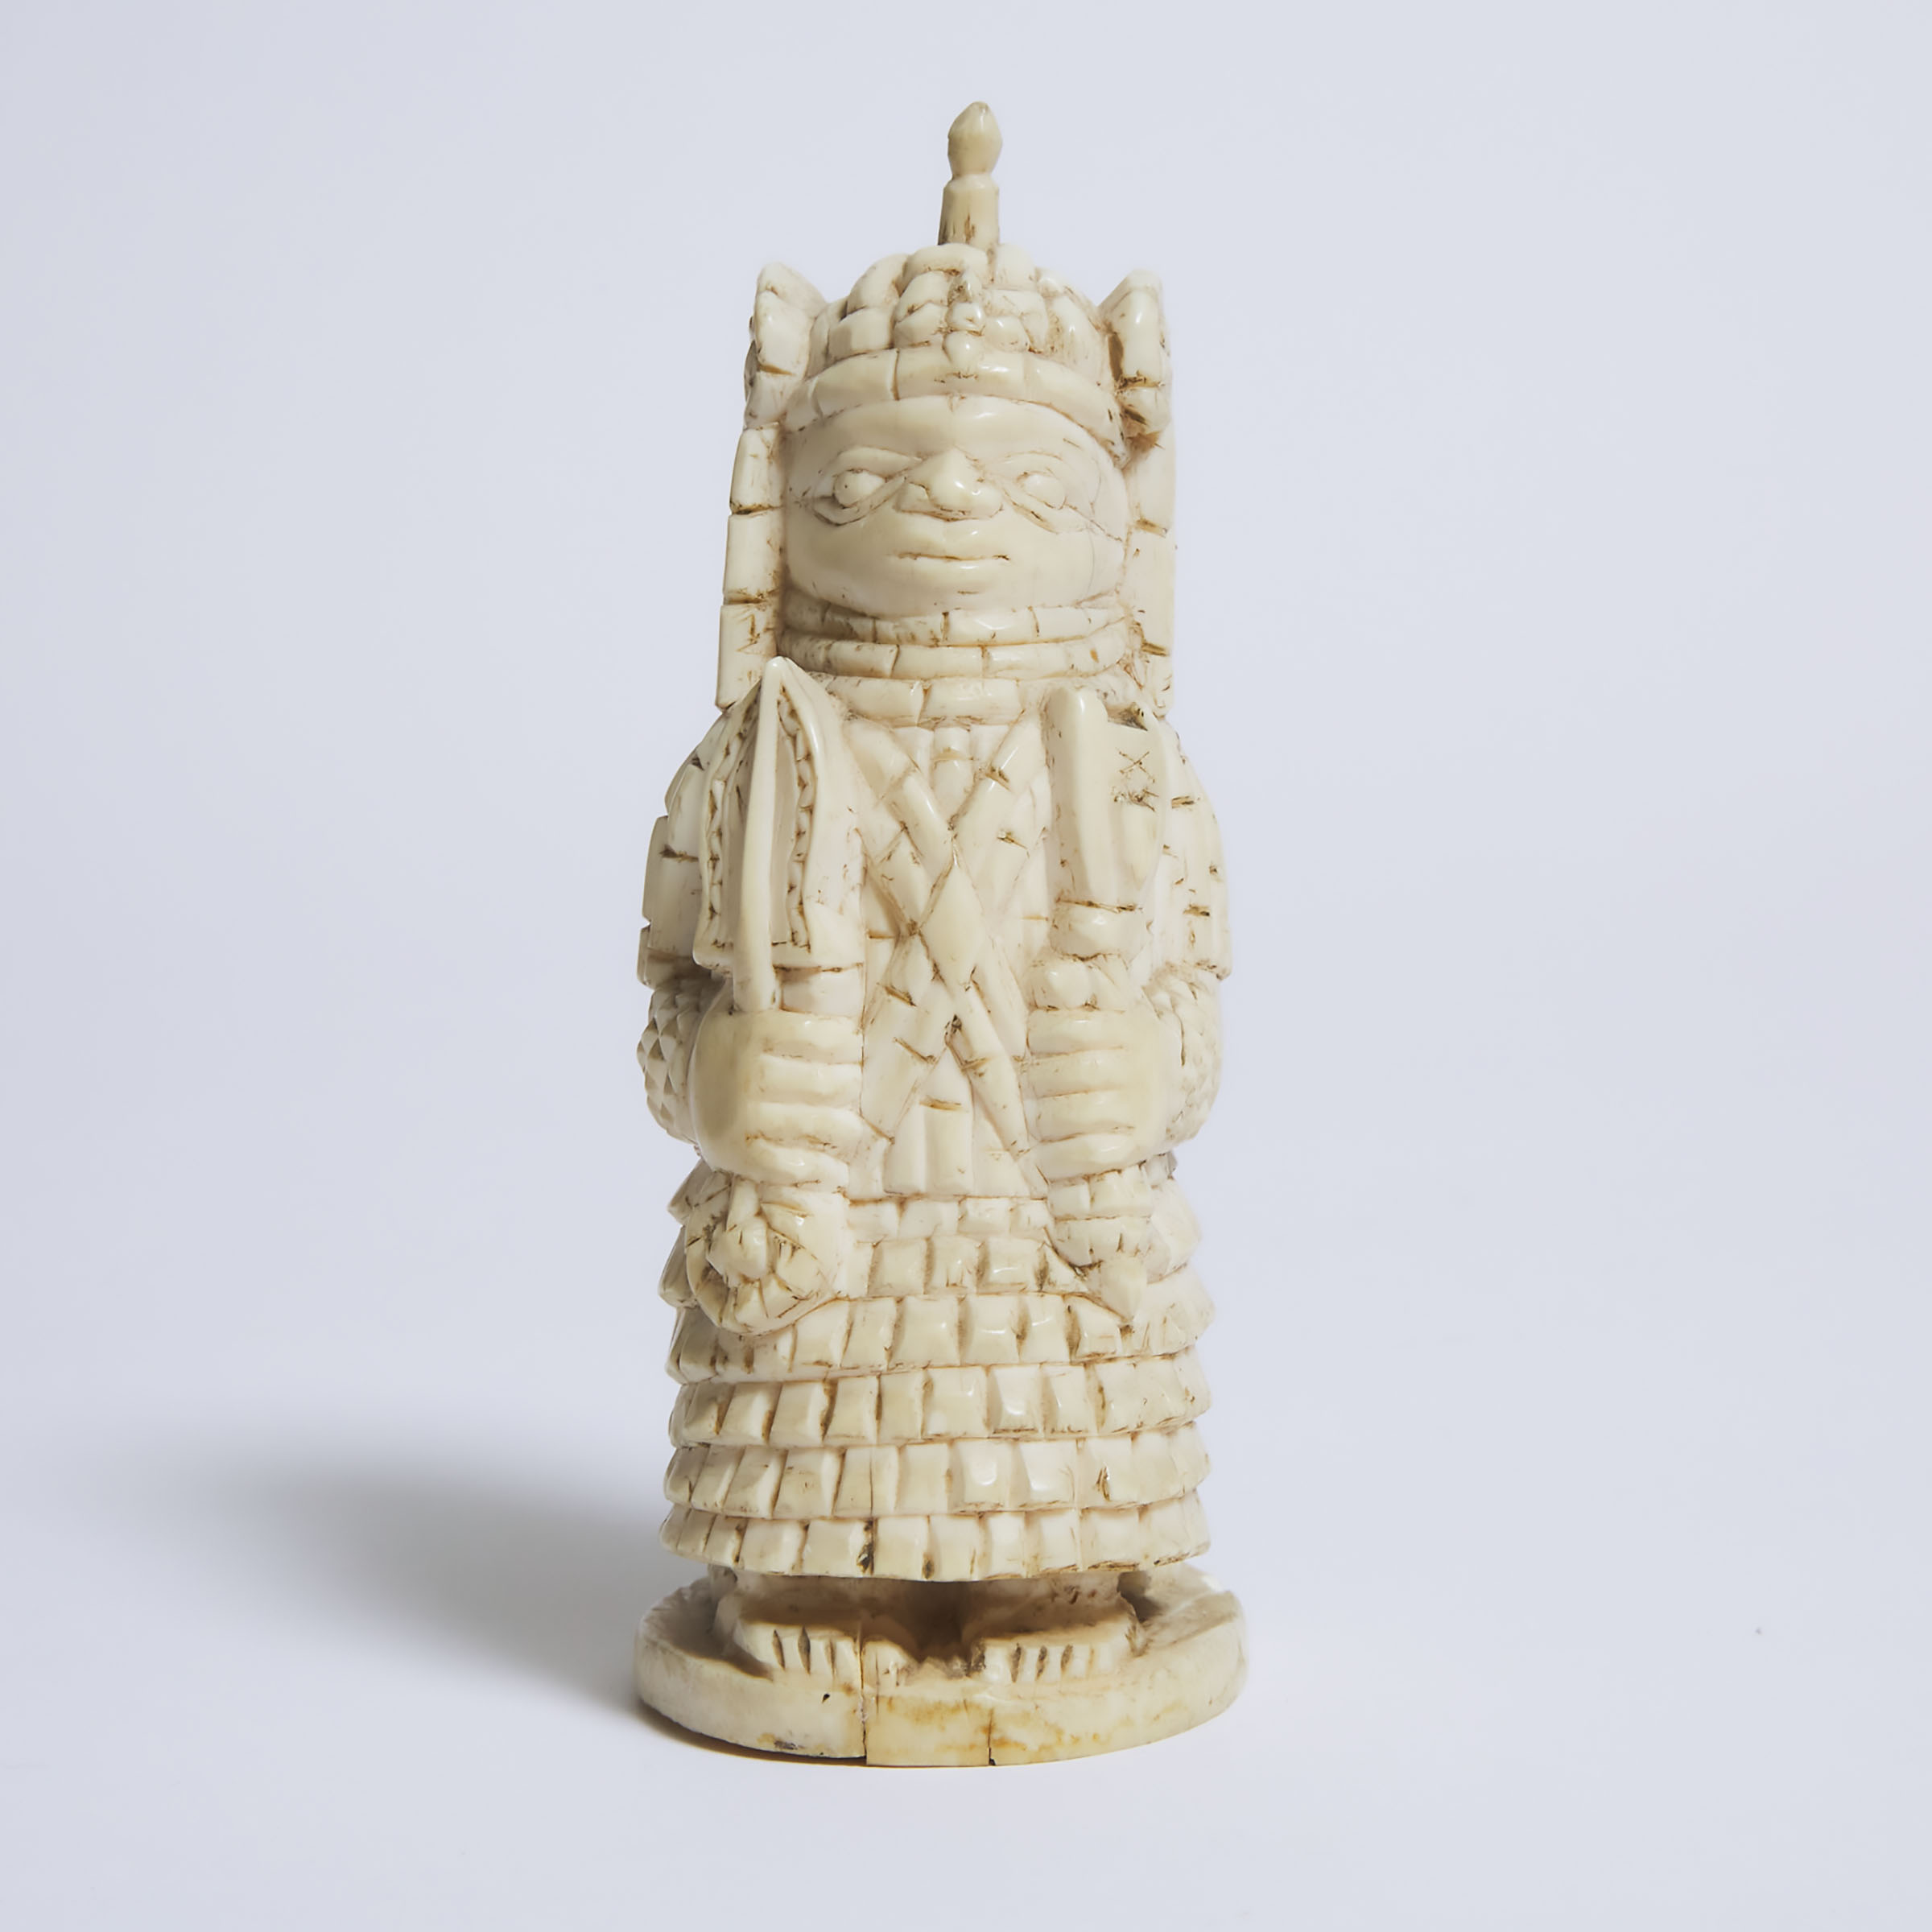 Benin Carved Ivory Alter Figure of an